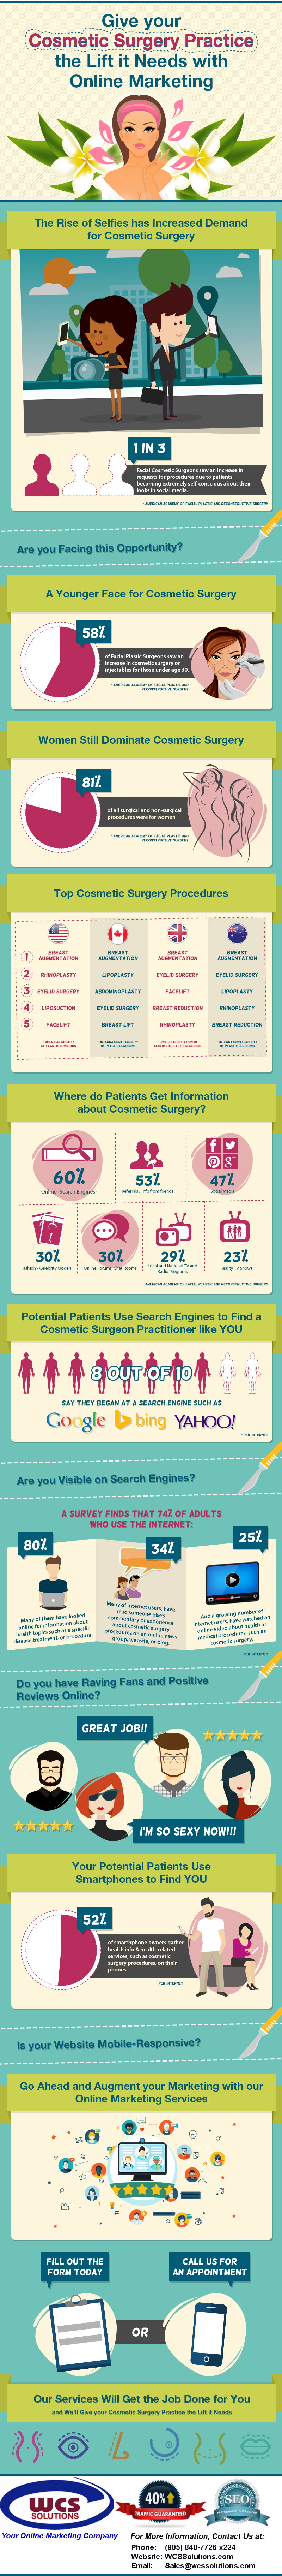 WCS-Solutions-Online-Marketing-For-Cosmetic-Surgeons-Infographic